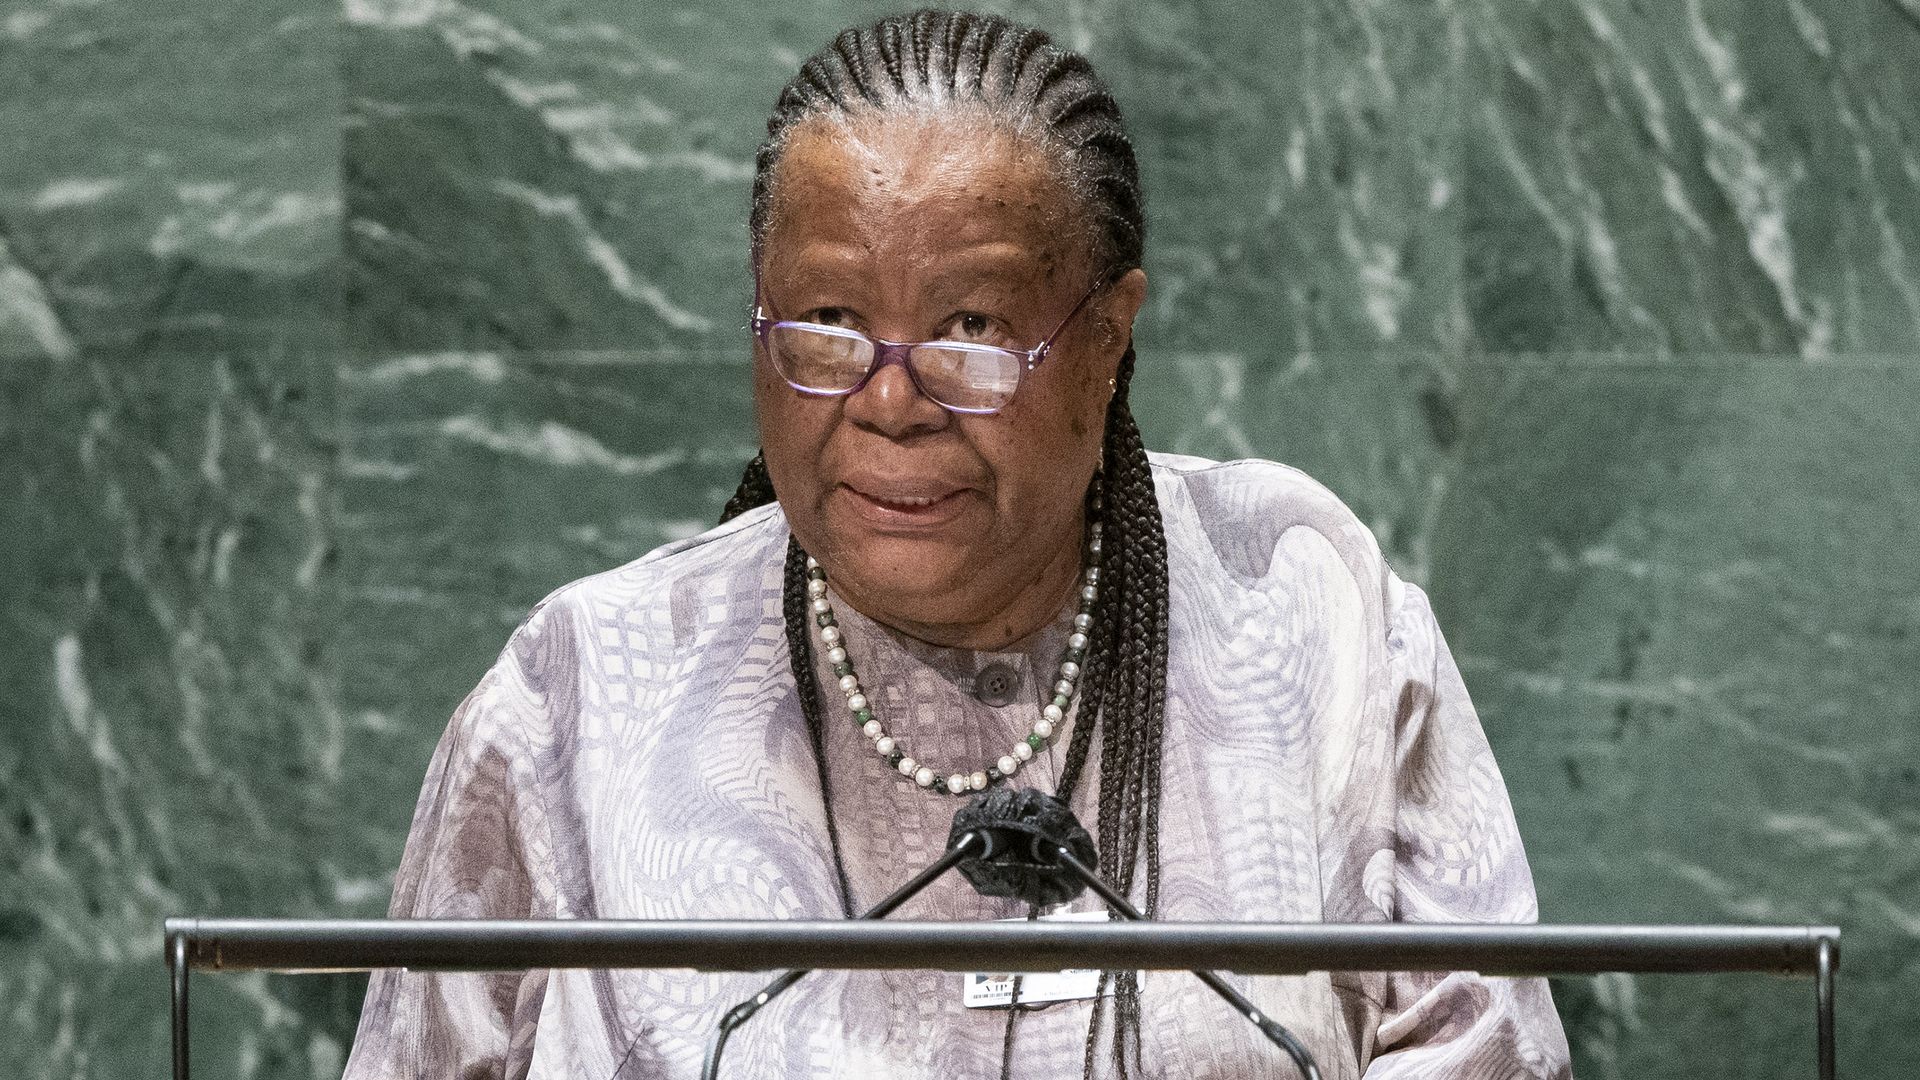  South Africa's Minister of International Relations and Cooperation Naledi Pandor addresses the 76th Session of the U.N. General Assembly on September 22, 2021 in New York City.